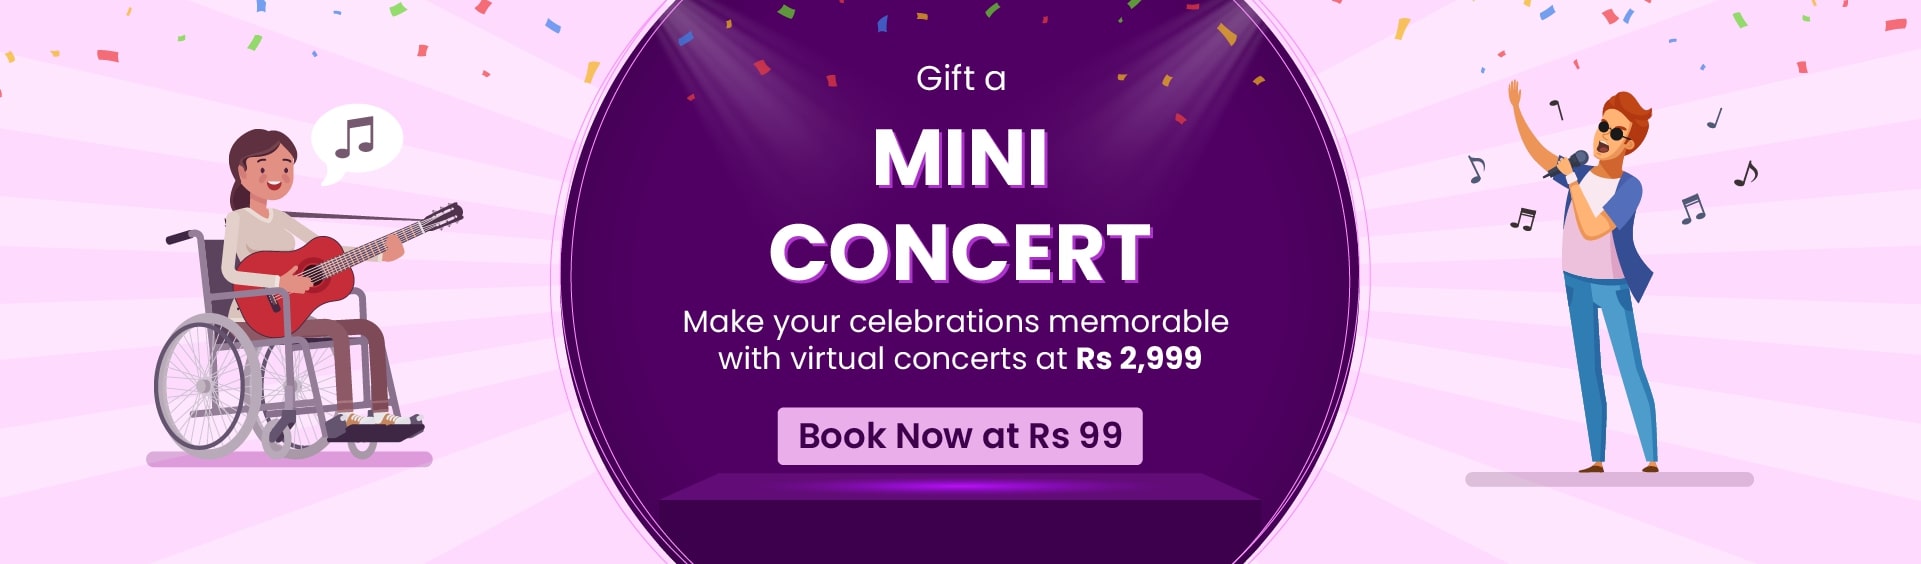 Gift a Mini Concert: Make your celebrations memorable wih virtual concerts made just for you. Book now